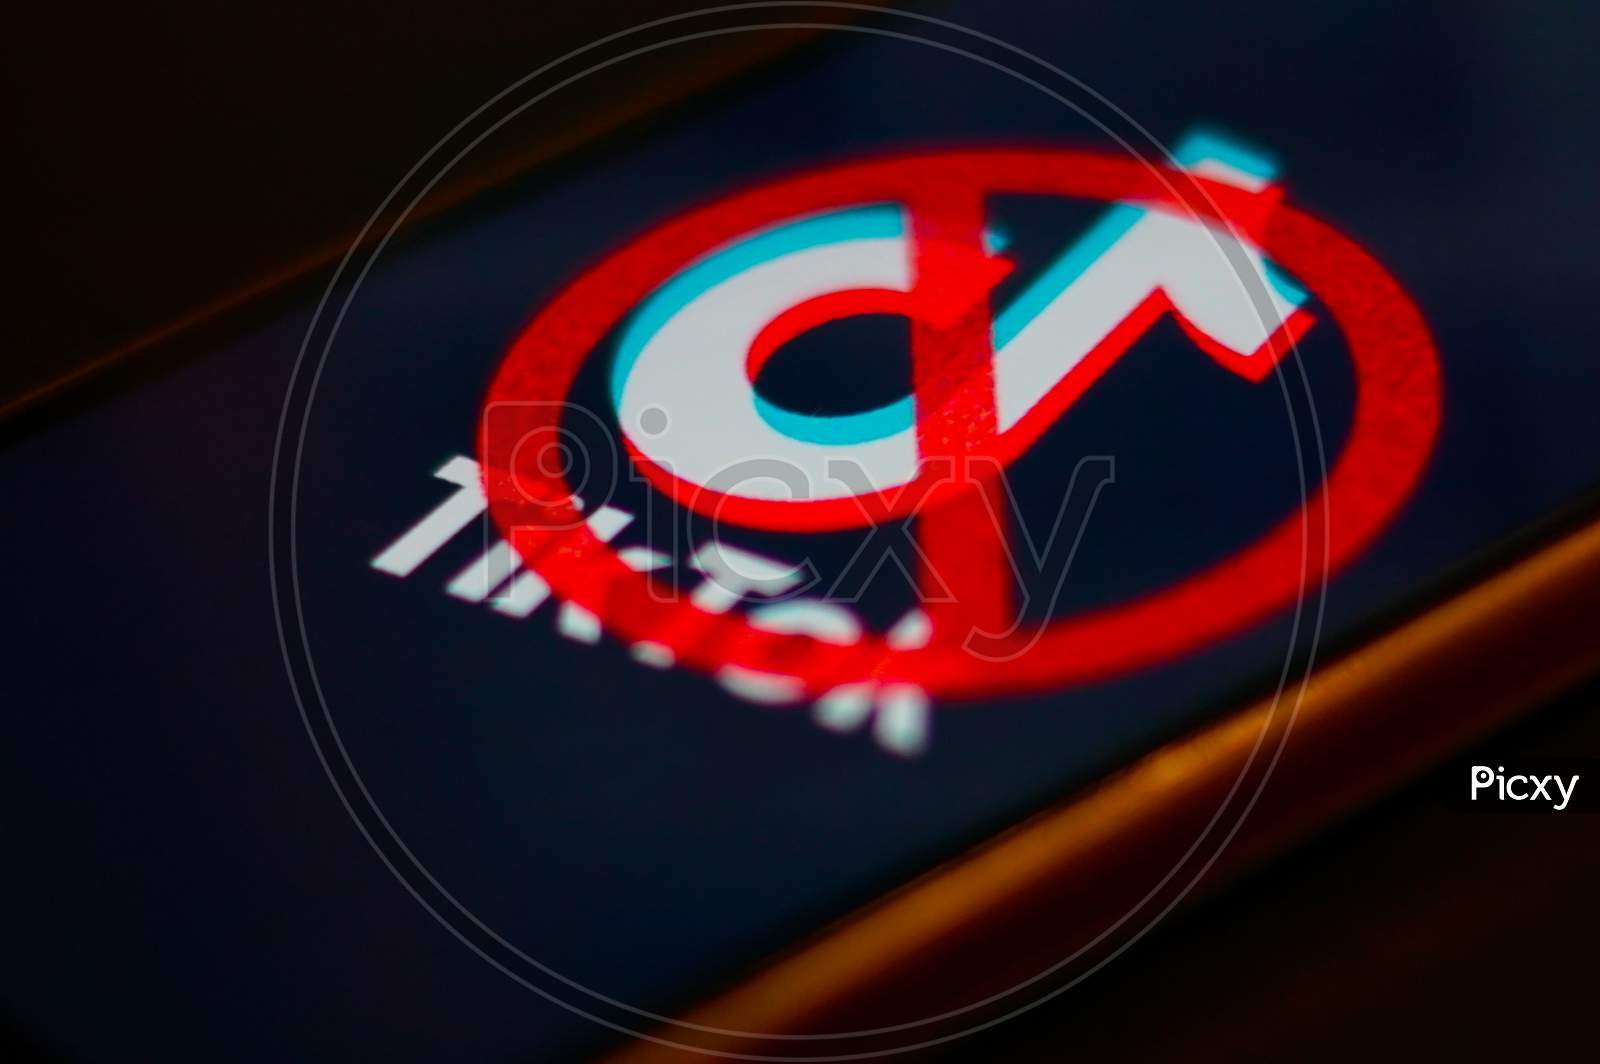 Tiktok Application Logo with banned symbol on a Mobile Screen